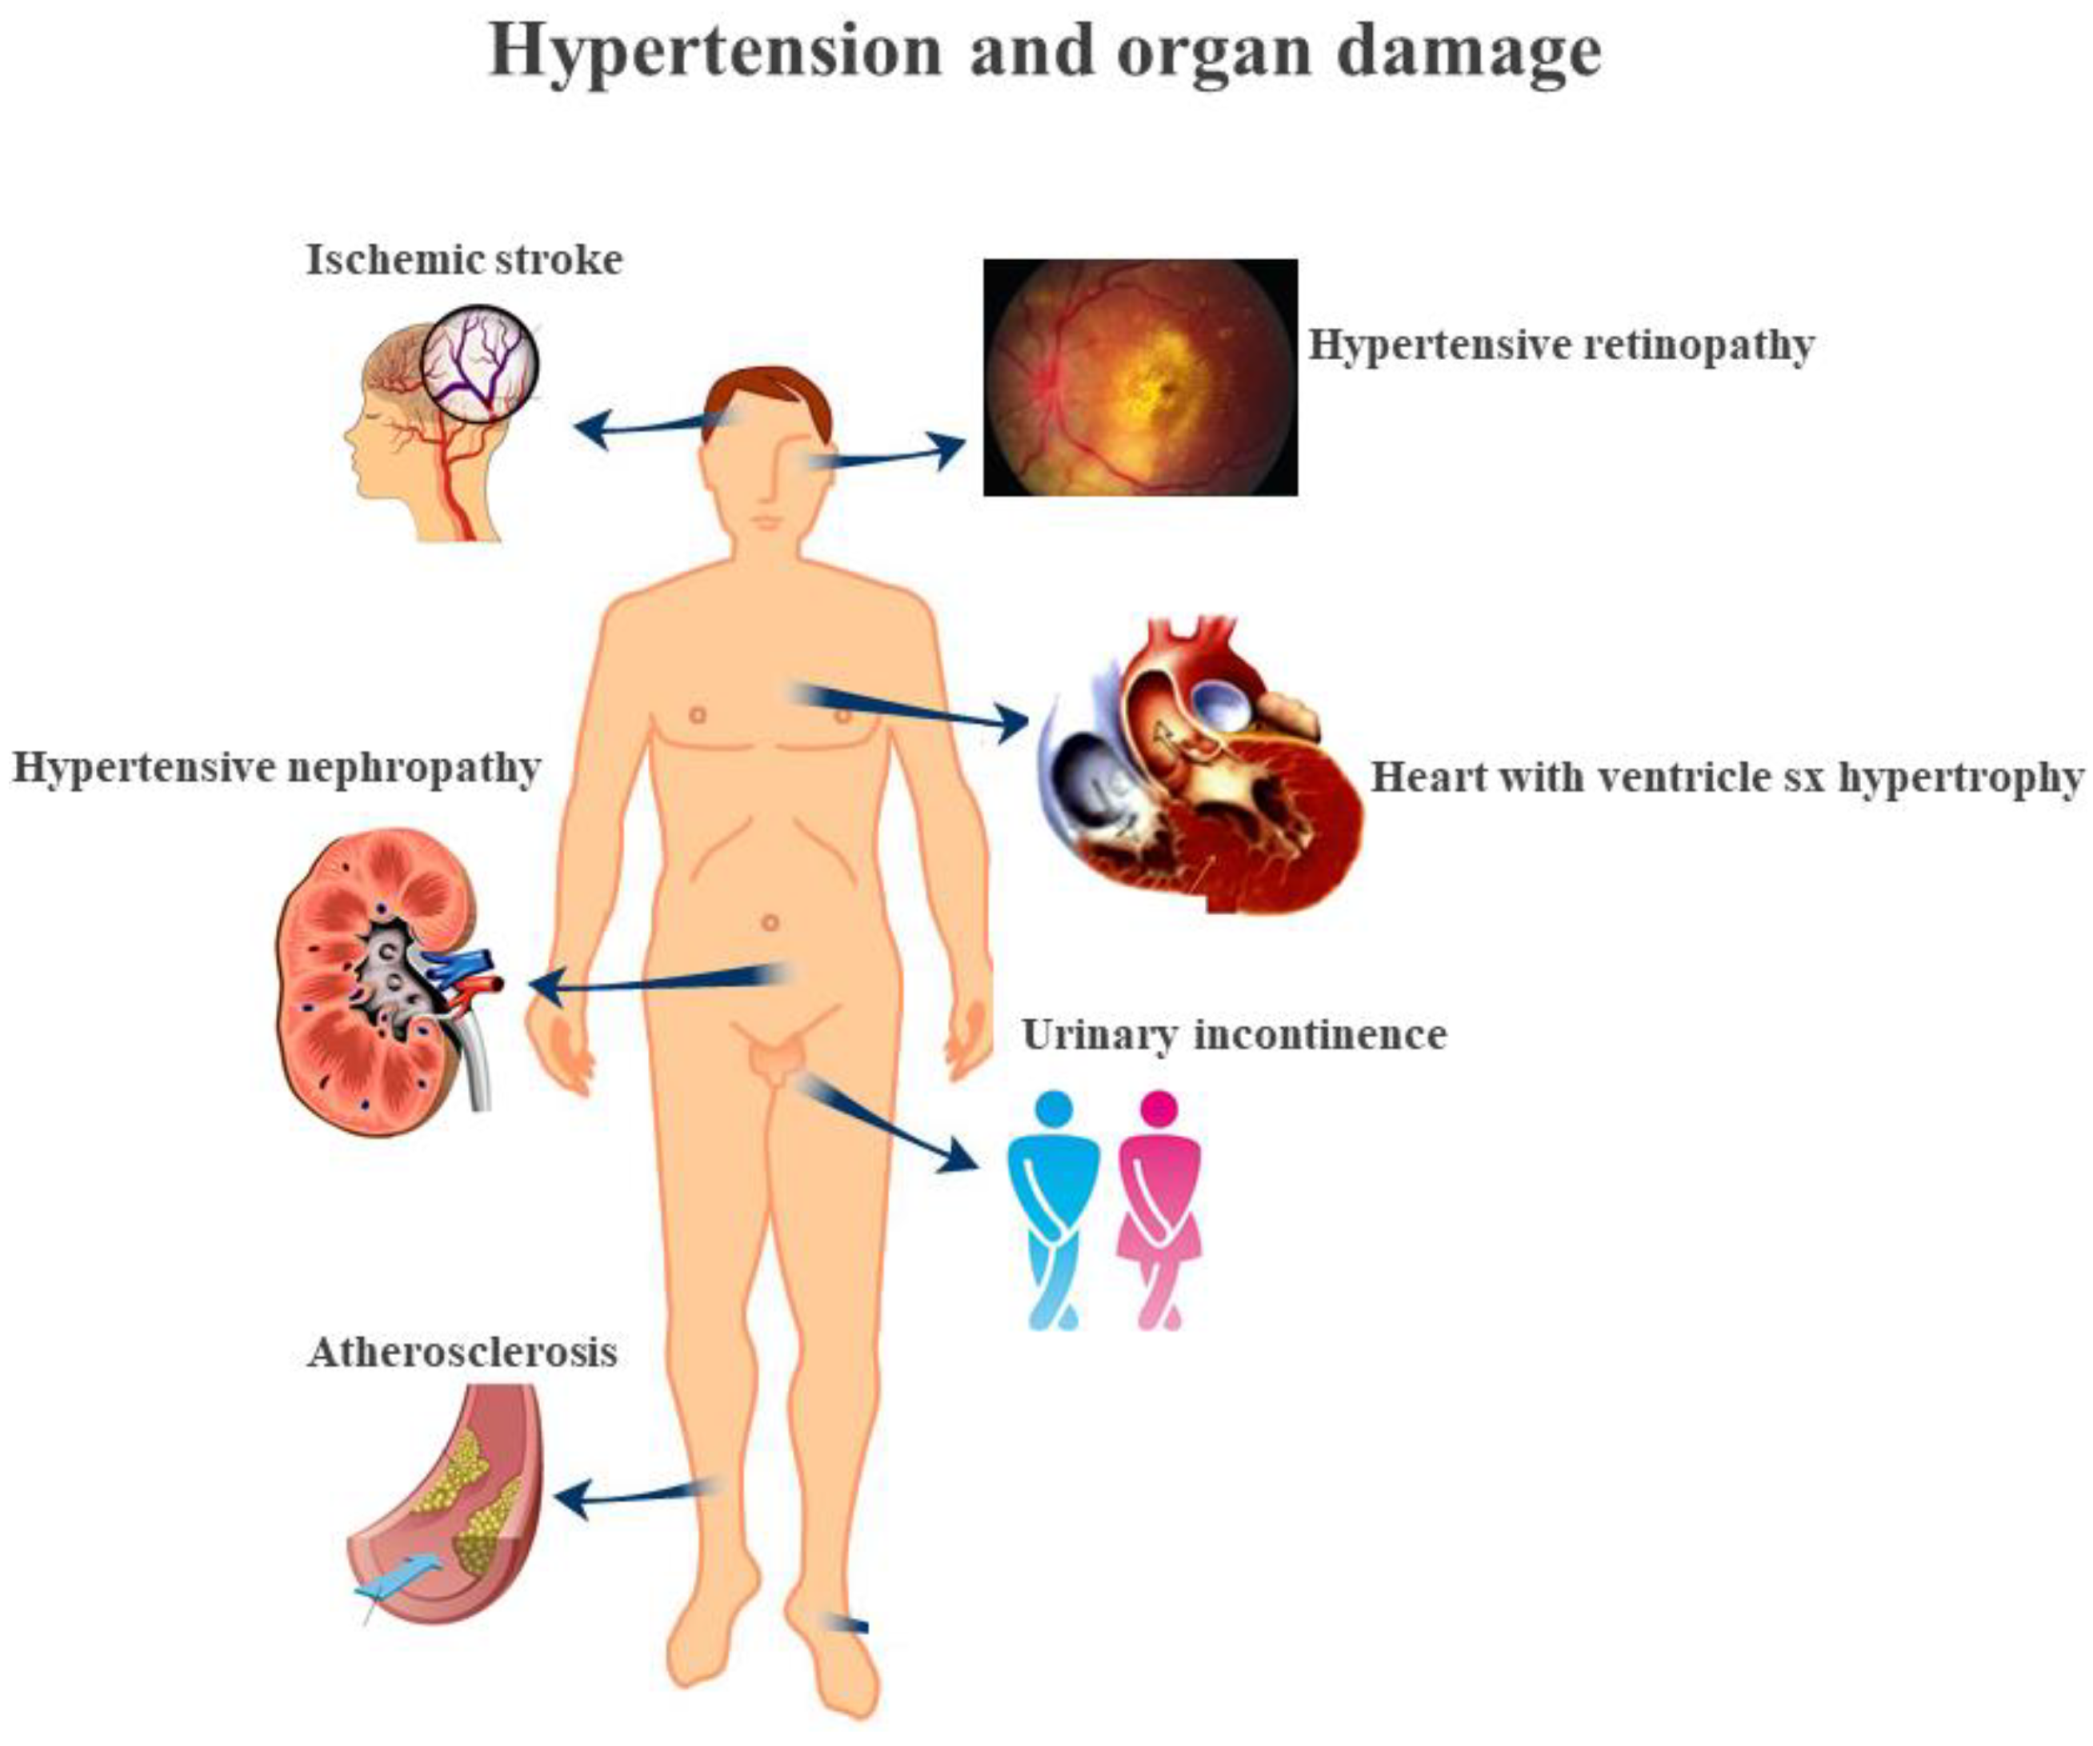 IJMS Free Full-Text The Contribution of Gut Microbiota and Endothelial Dysfunction in the Development of Arterial Hypertension in Animal Models and in Humans